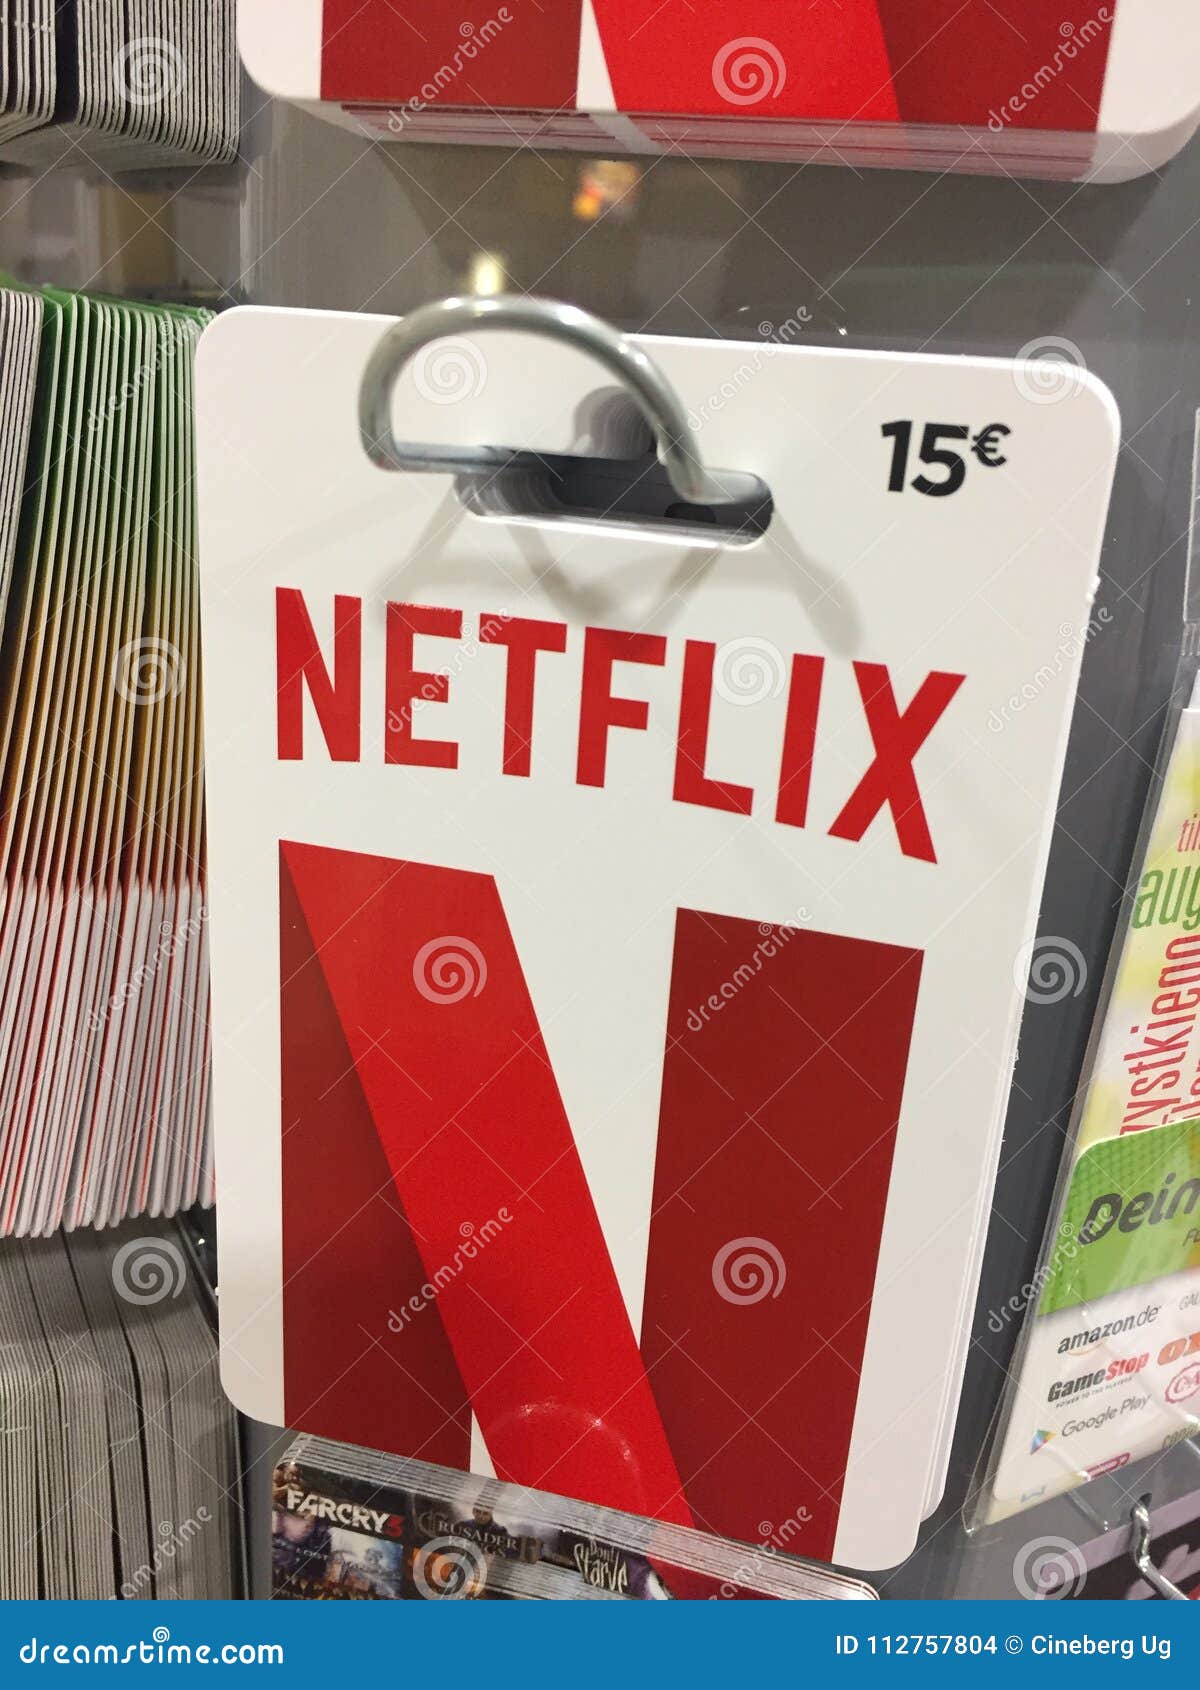 Netflix gift card editorial stock image. Image of label -